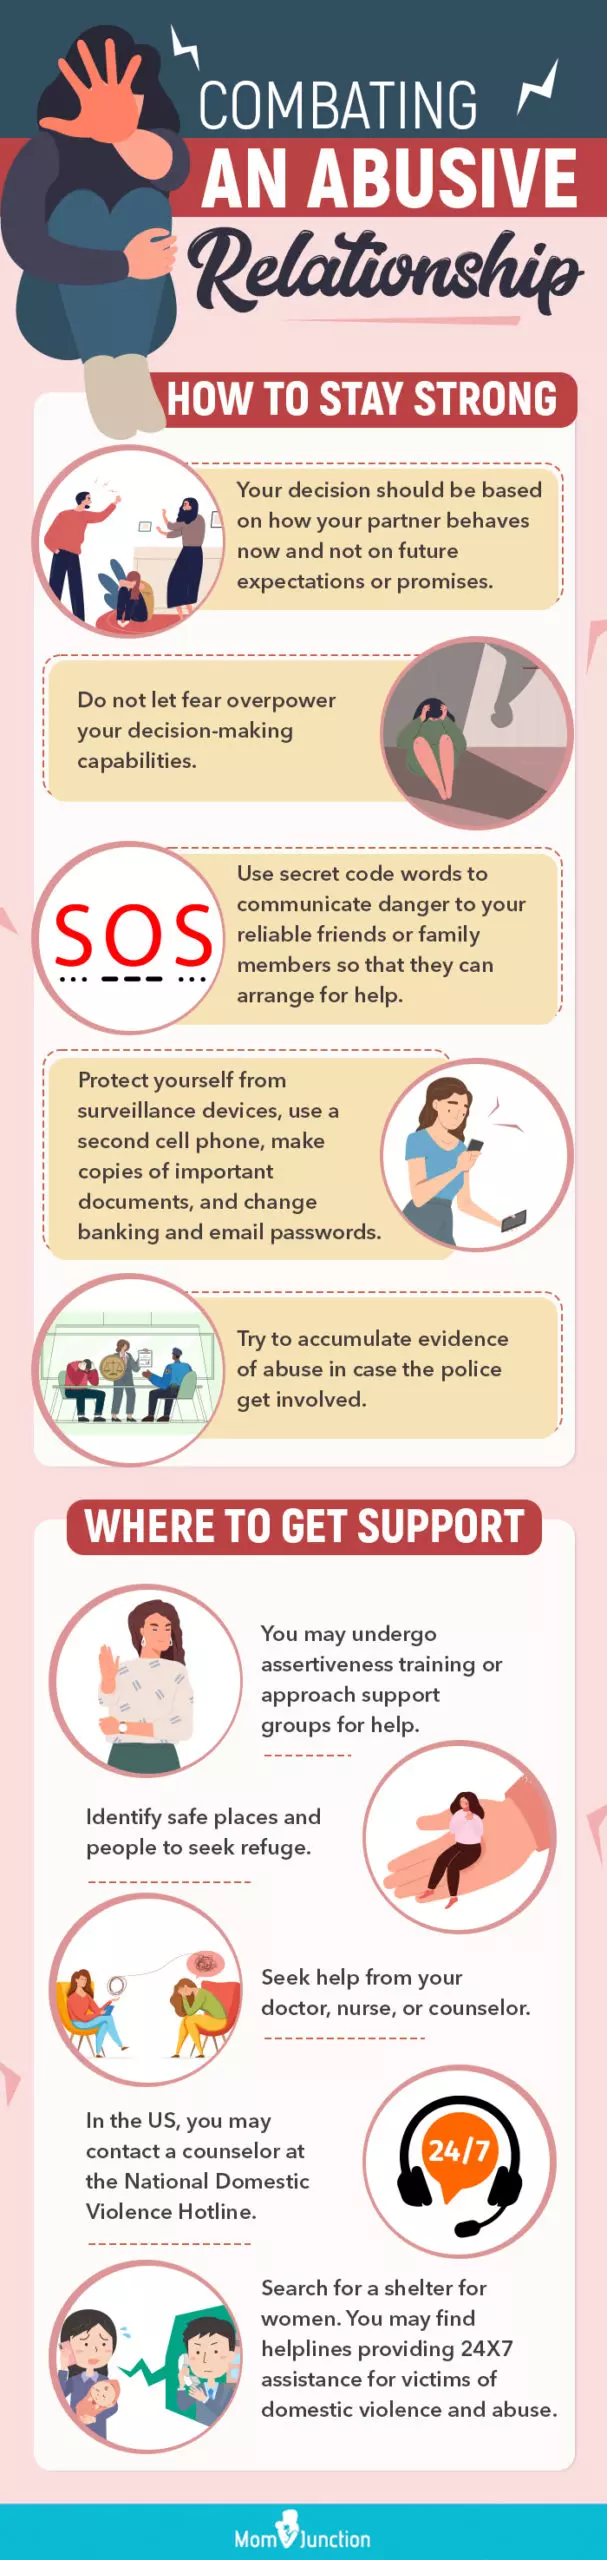 combating an abusive relationship (infographic)